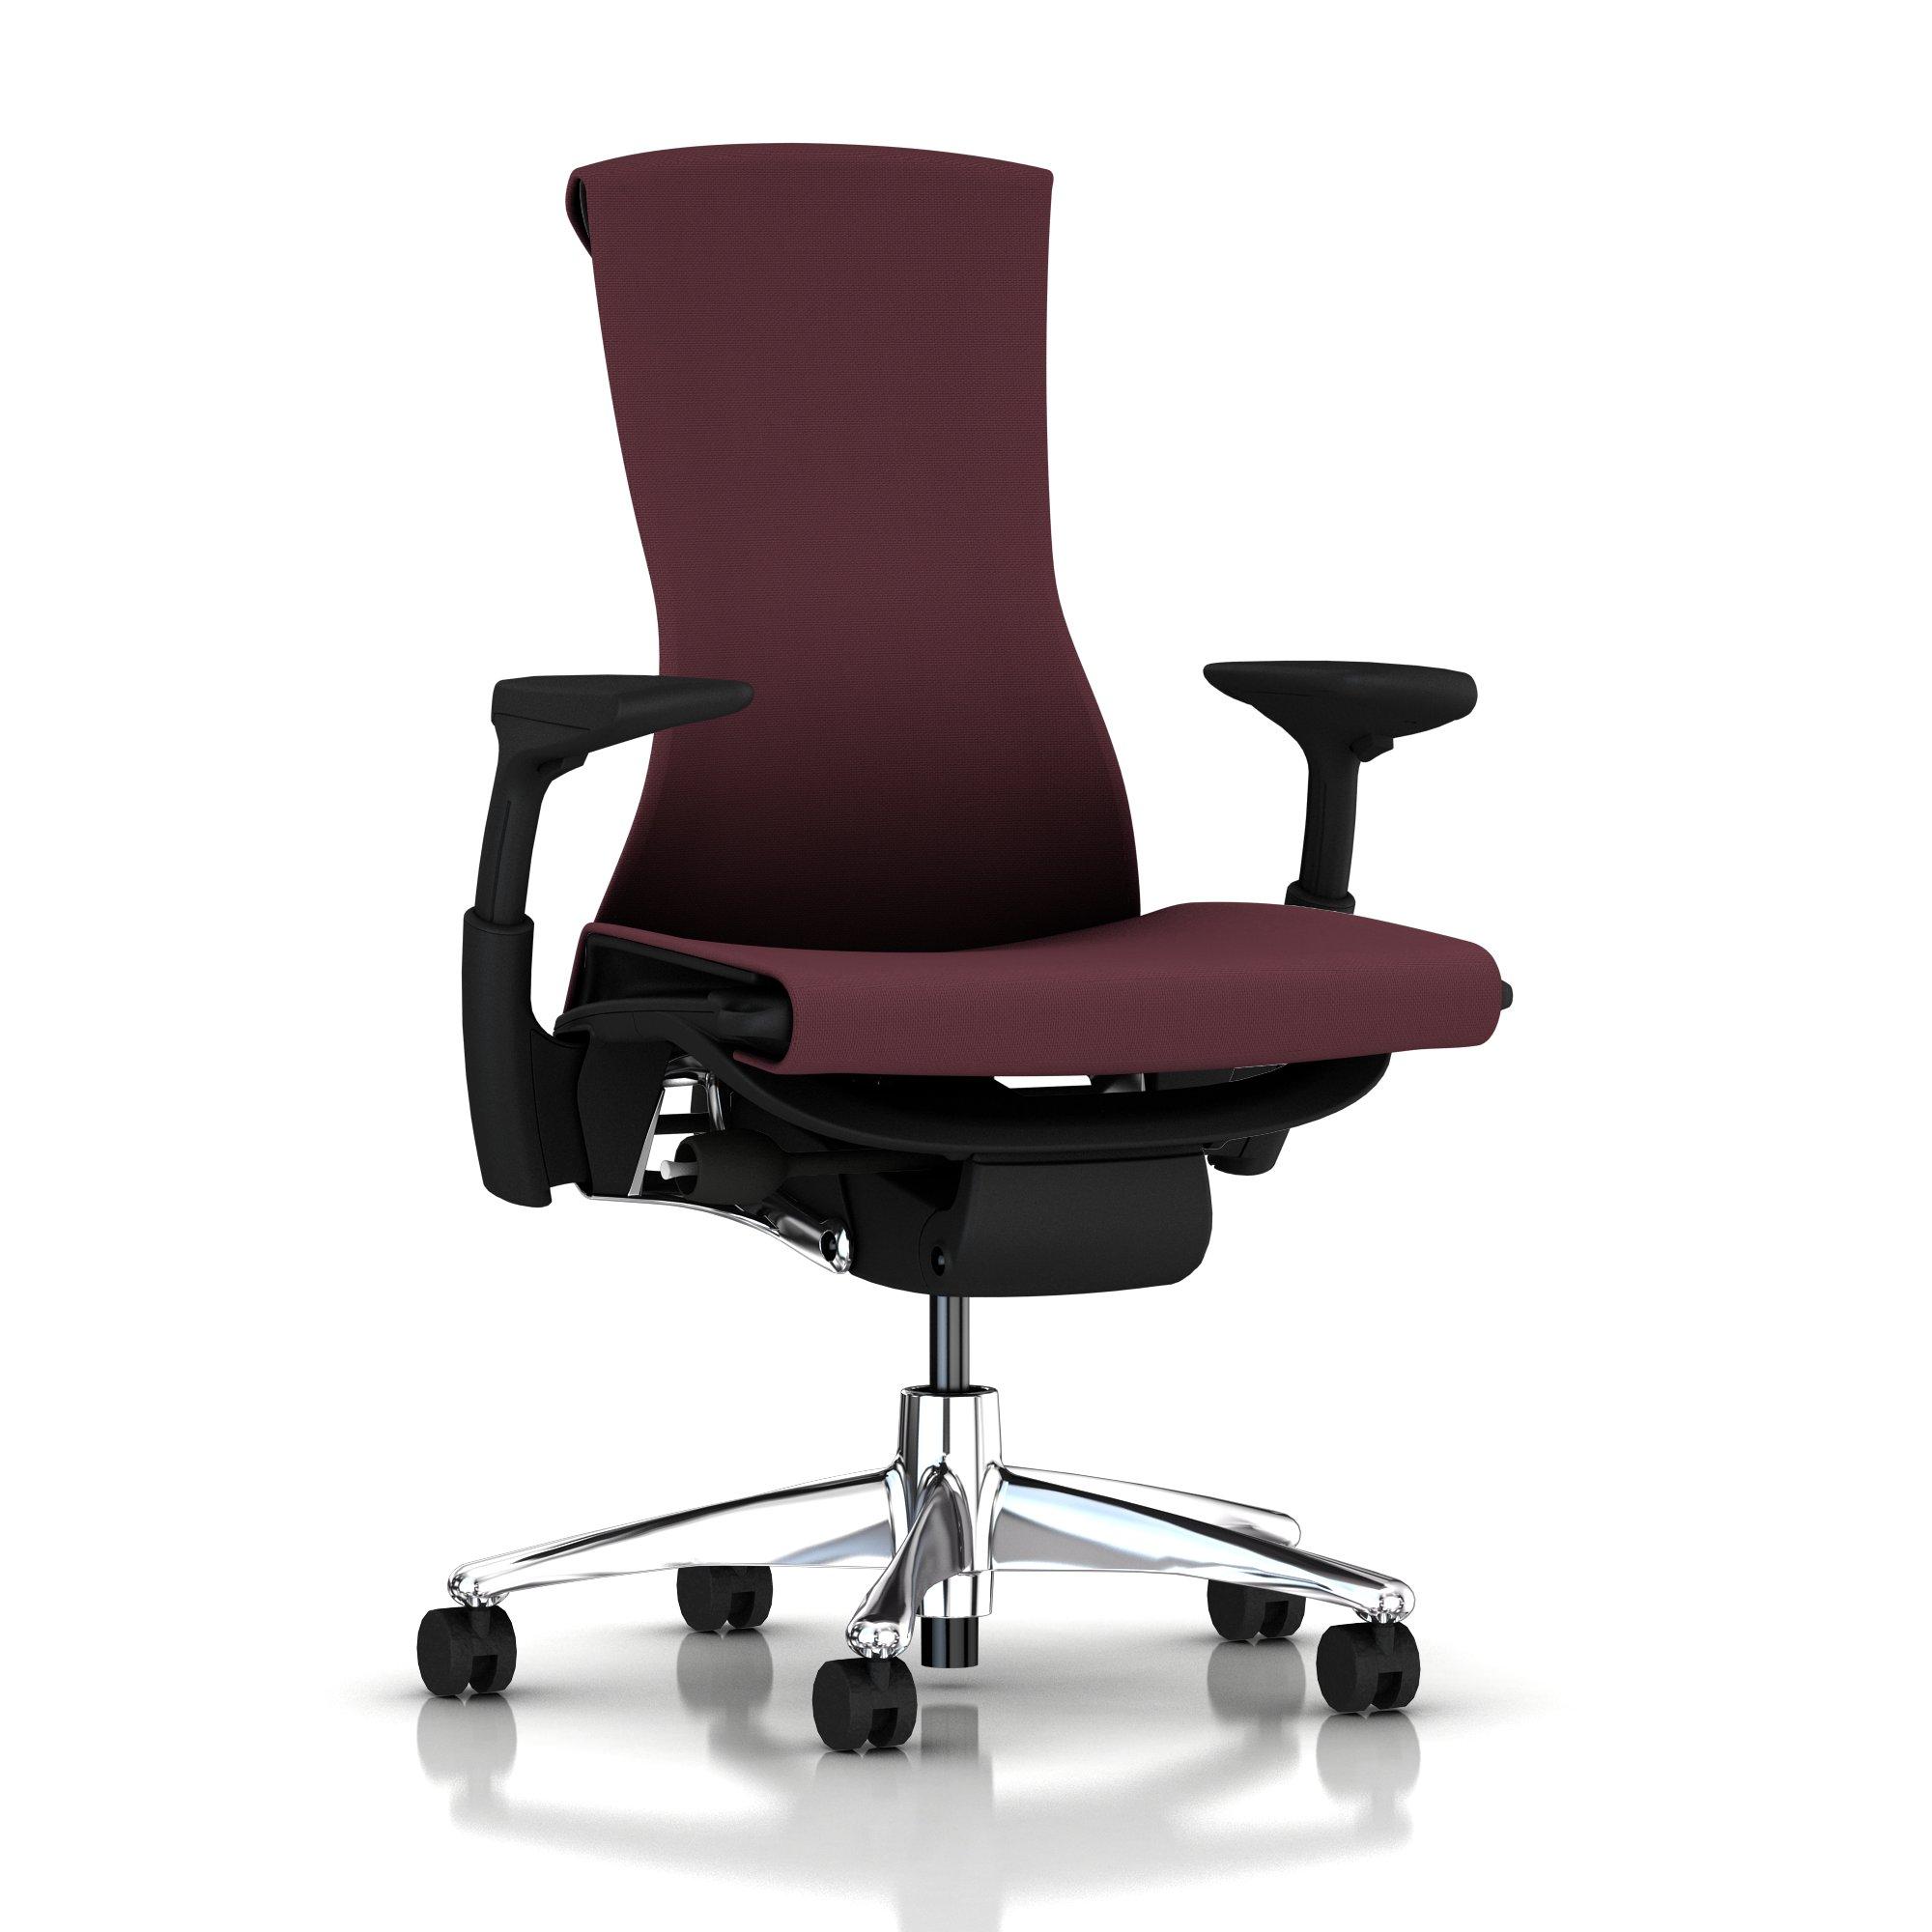 Embody Chair Mulberry Rhythm with Graphite Frame Aluminum Base by Herman Miller